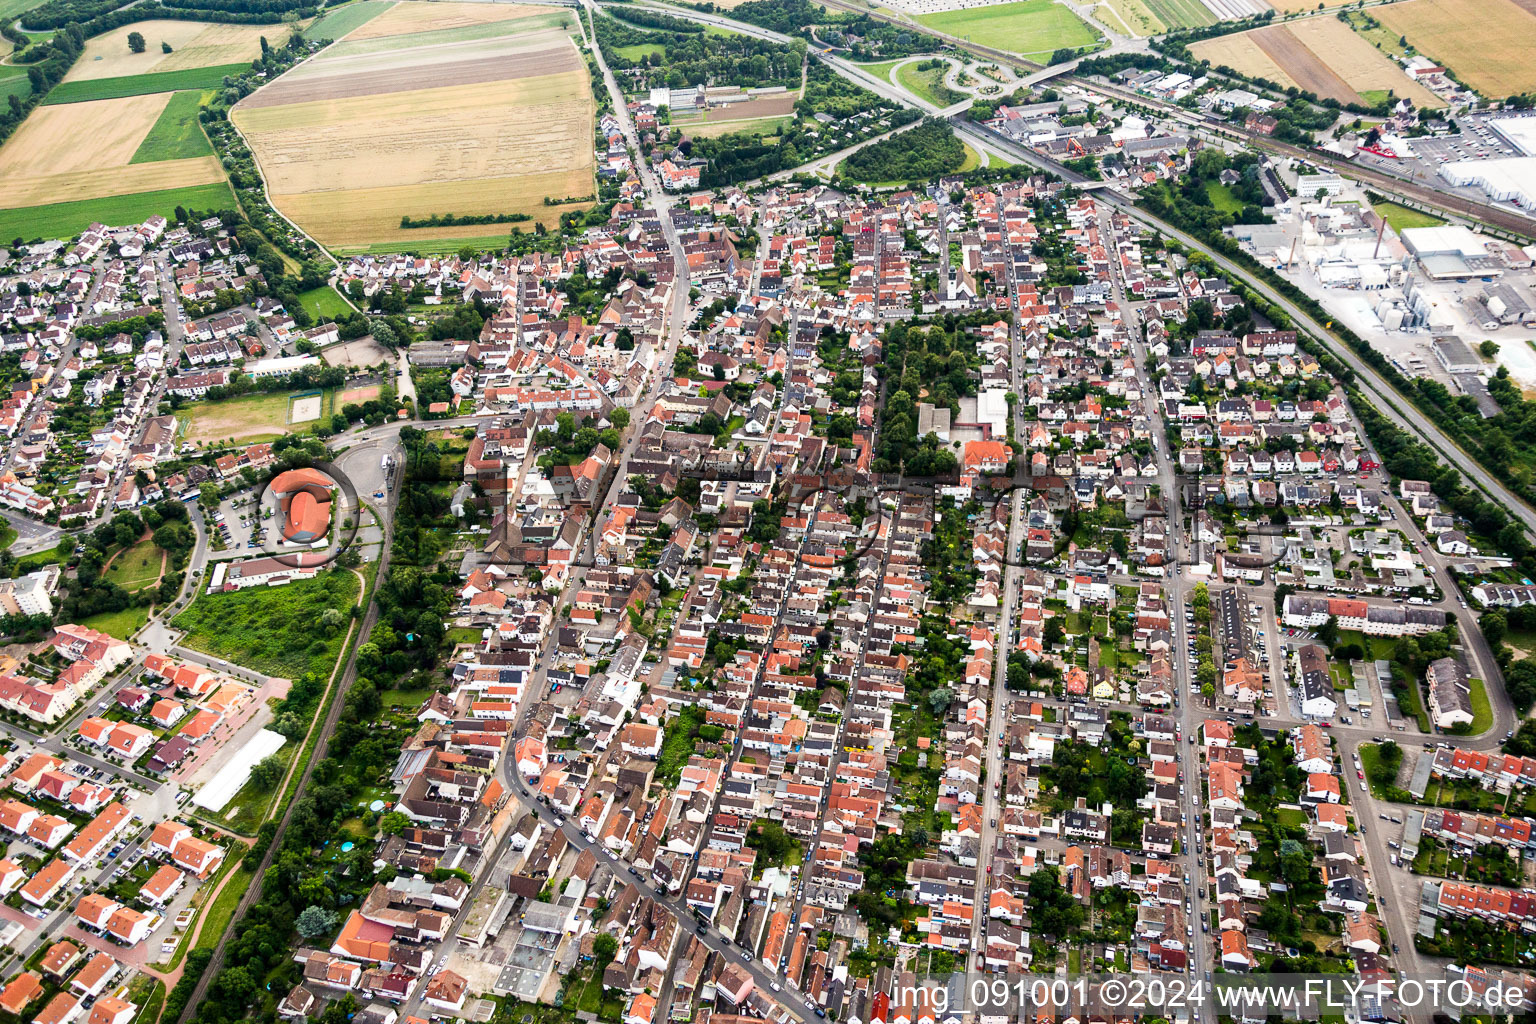 Town View of the streets and houses of the residential areas in the district Rheingoenheim in Ludwigshafen am Rhein in the state Rhineland-Palatinate, Germany